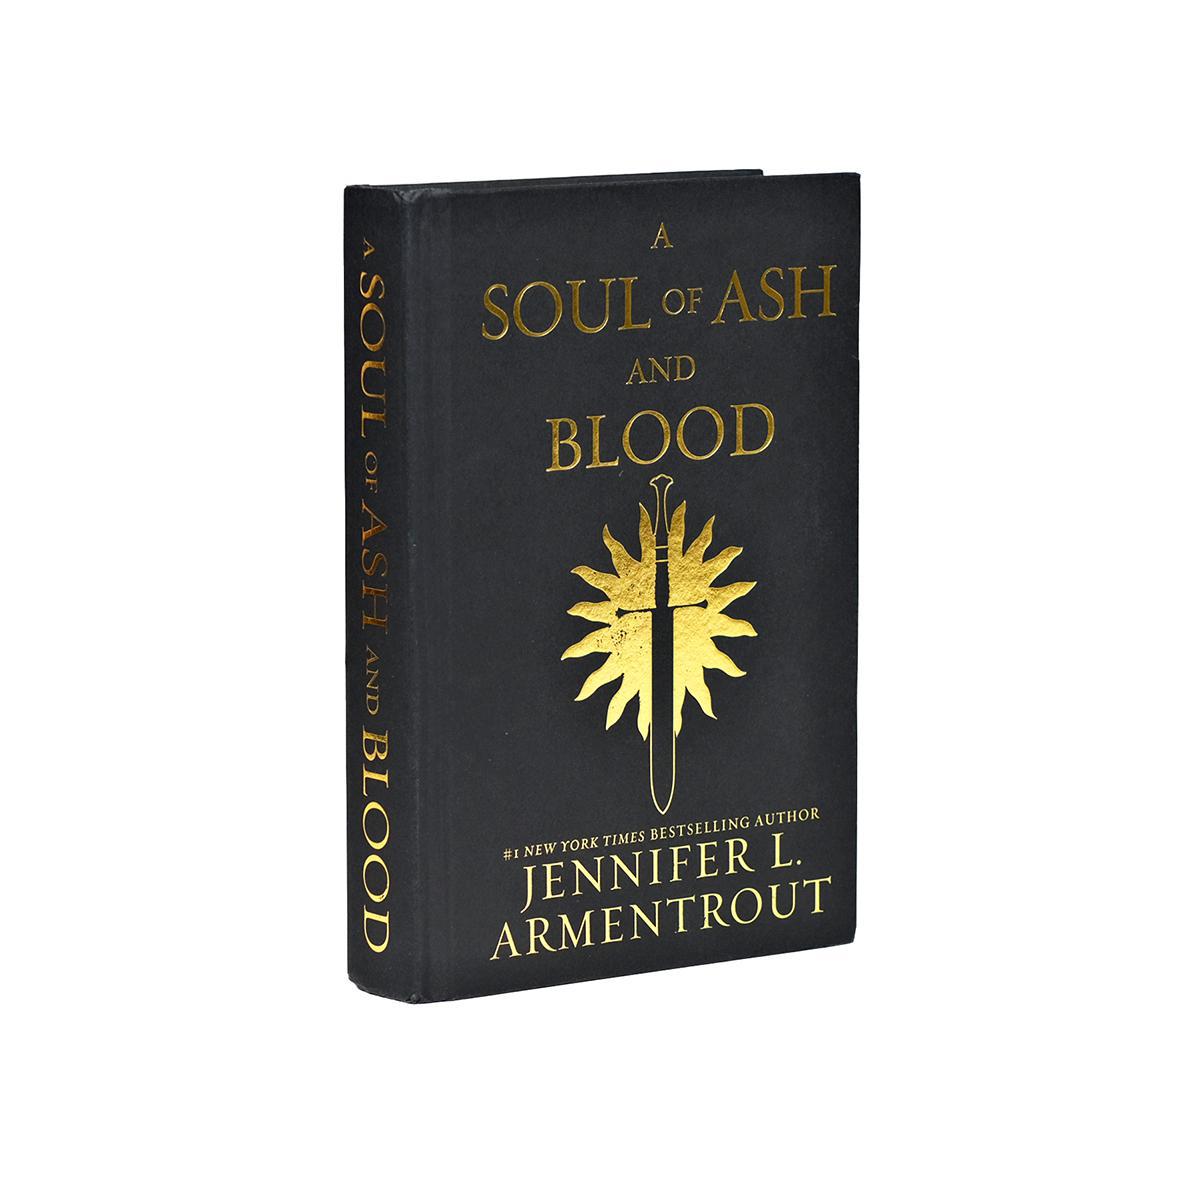 Customized Blood and Ash: A Soul of Ash and Blood - Single Jacket Only